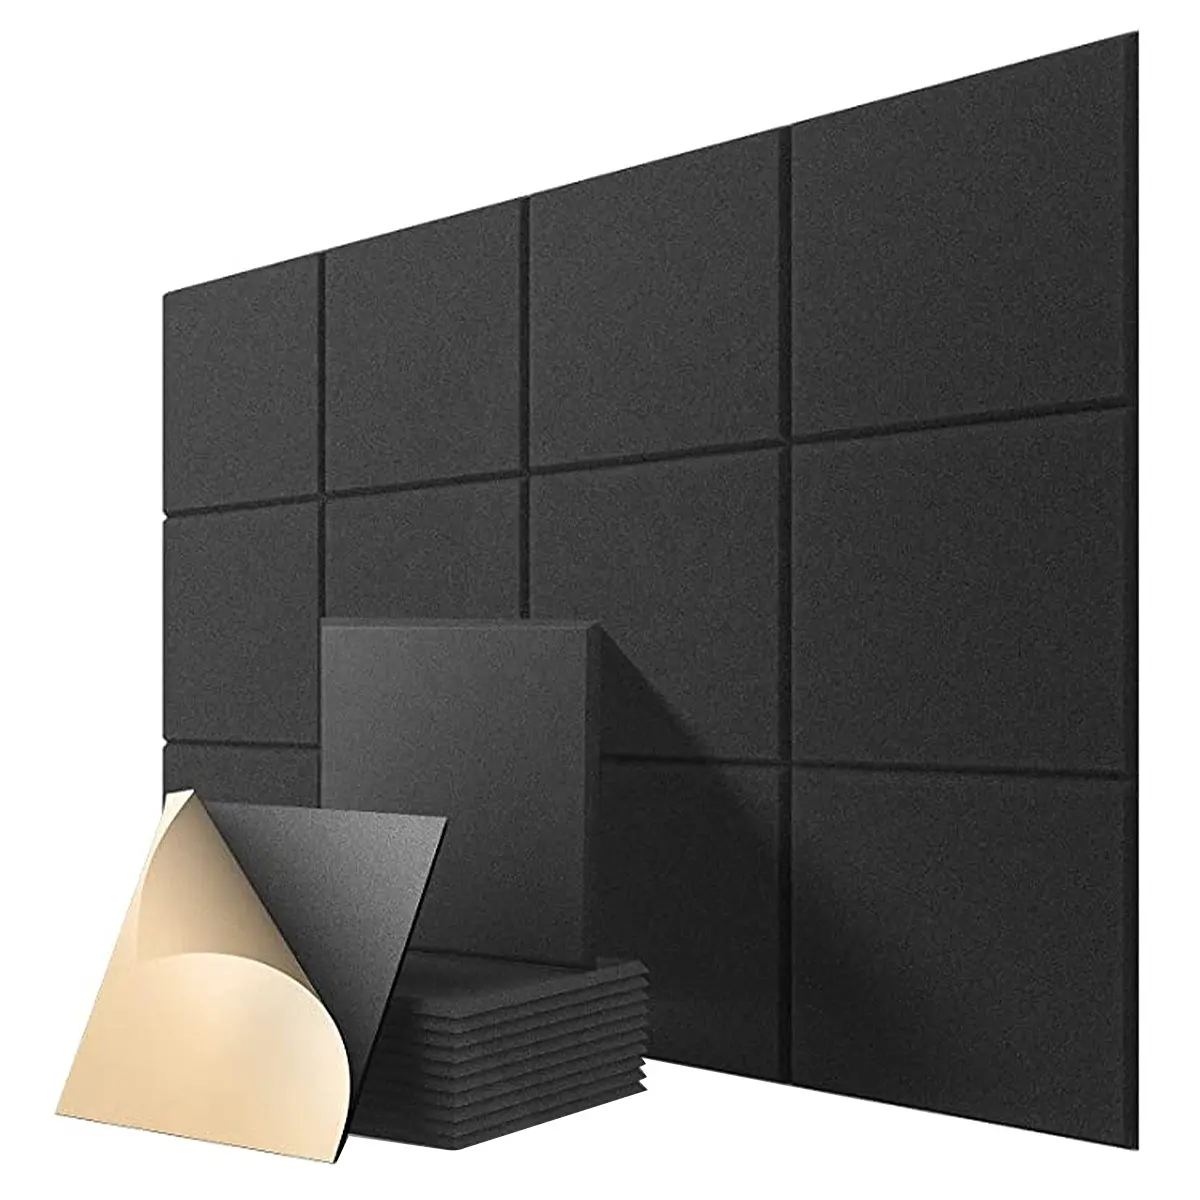 Self-adhesive Polyester Fiber Sound-Absorbing Panel Decorative 12''*12'' Felt Soundproof Acoustic Panels For Wall